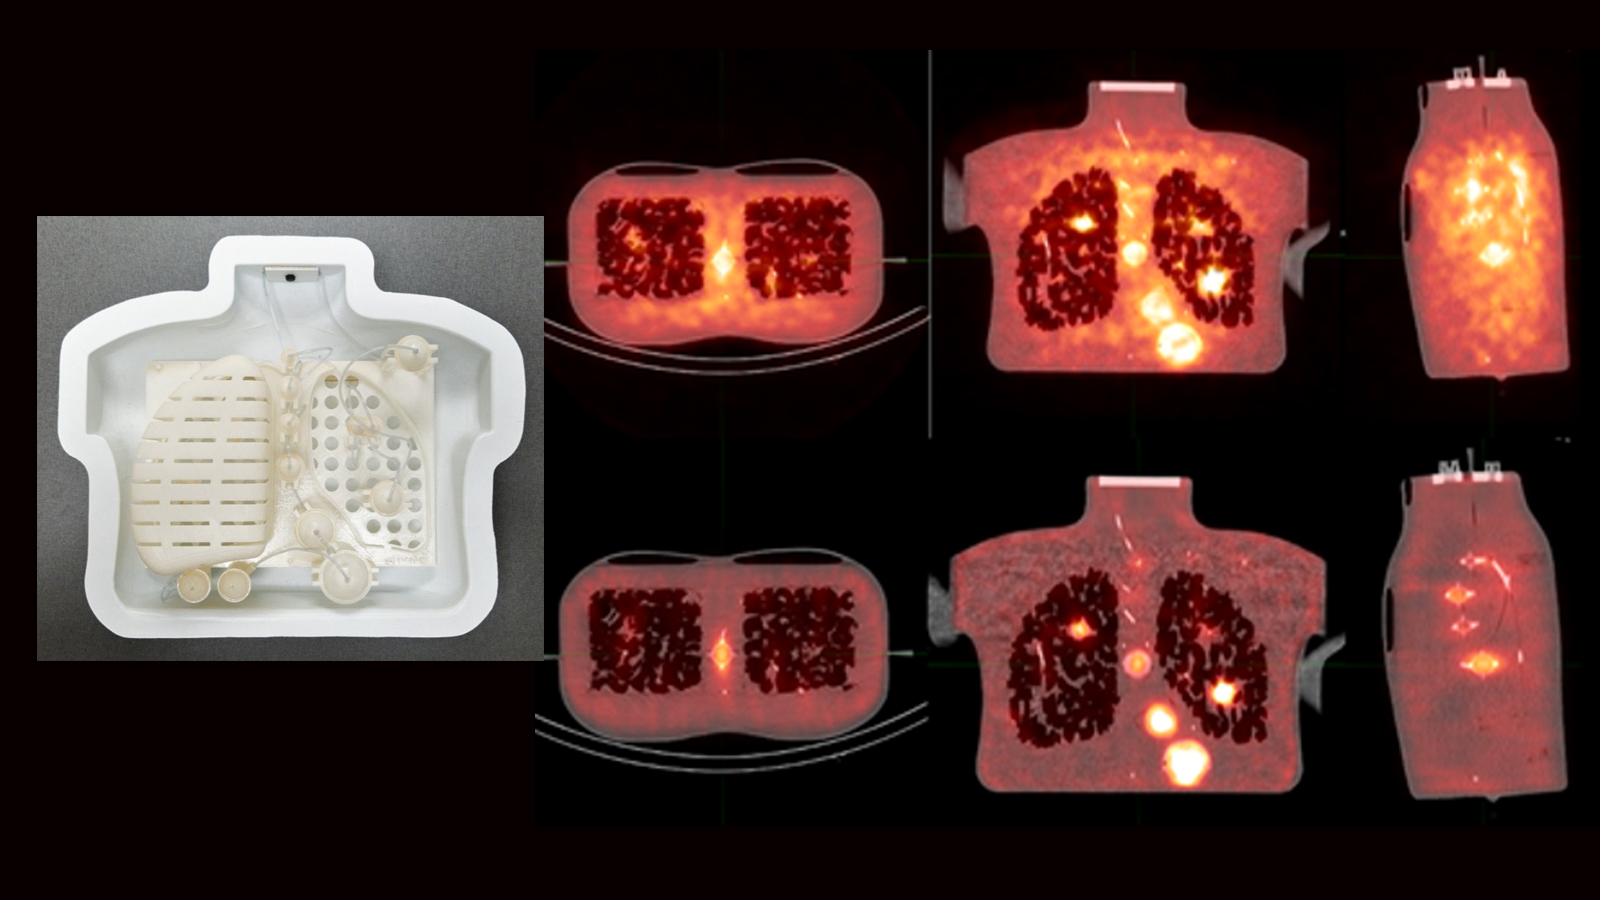 Scanned images of chest with radioisotopes used to diagnose cancer.